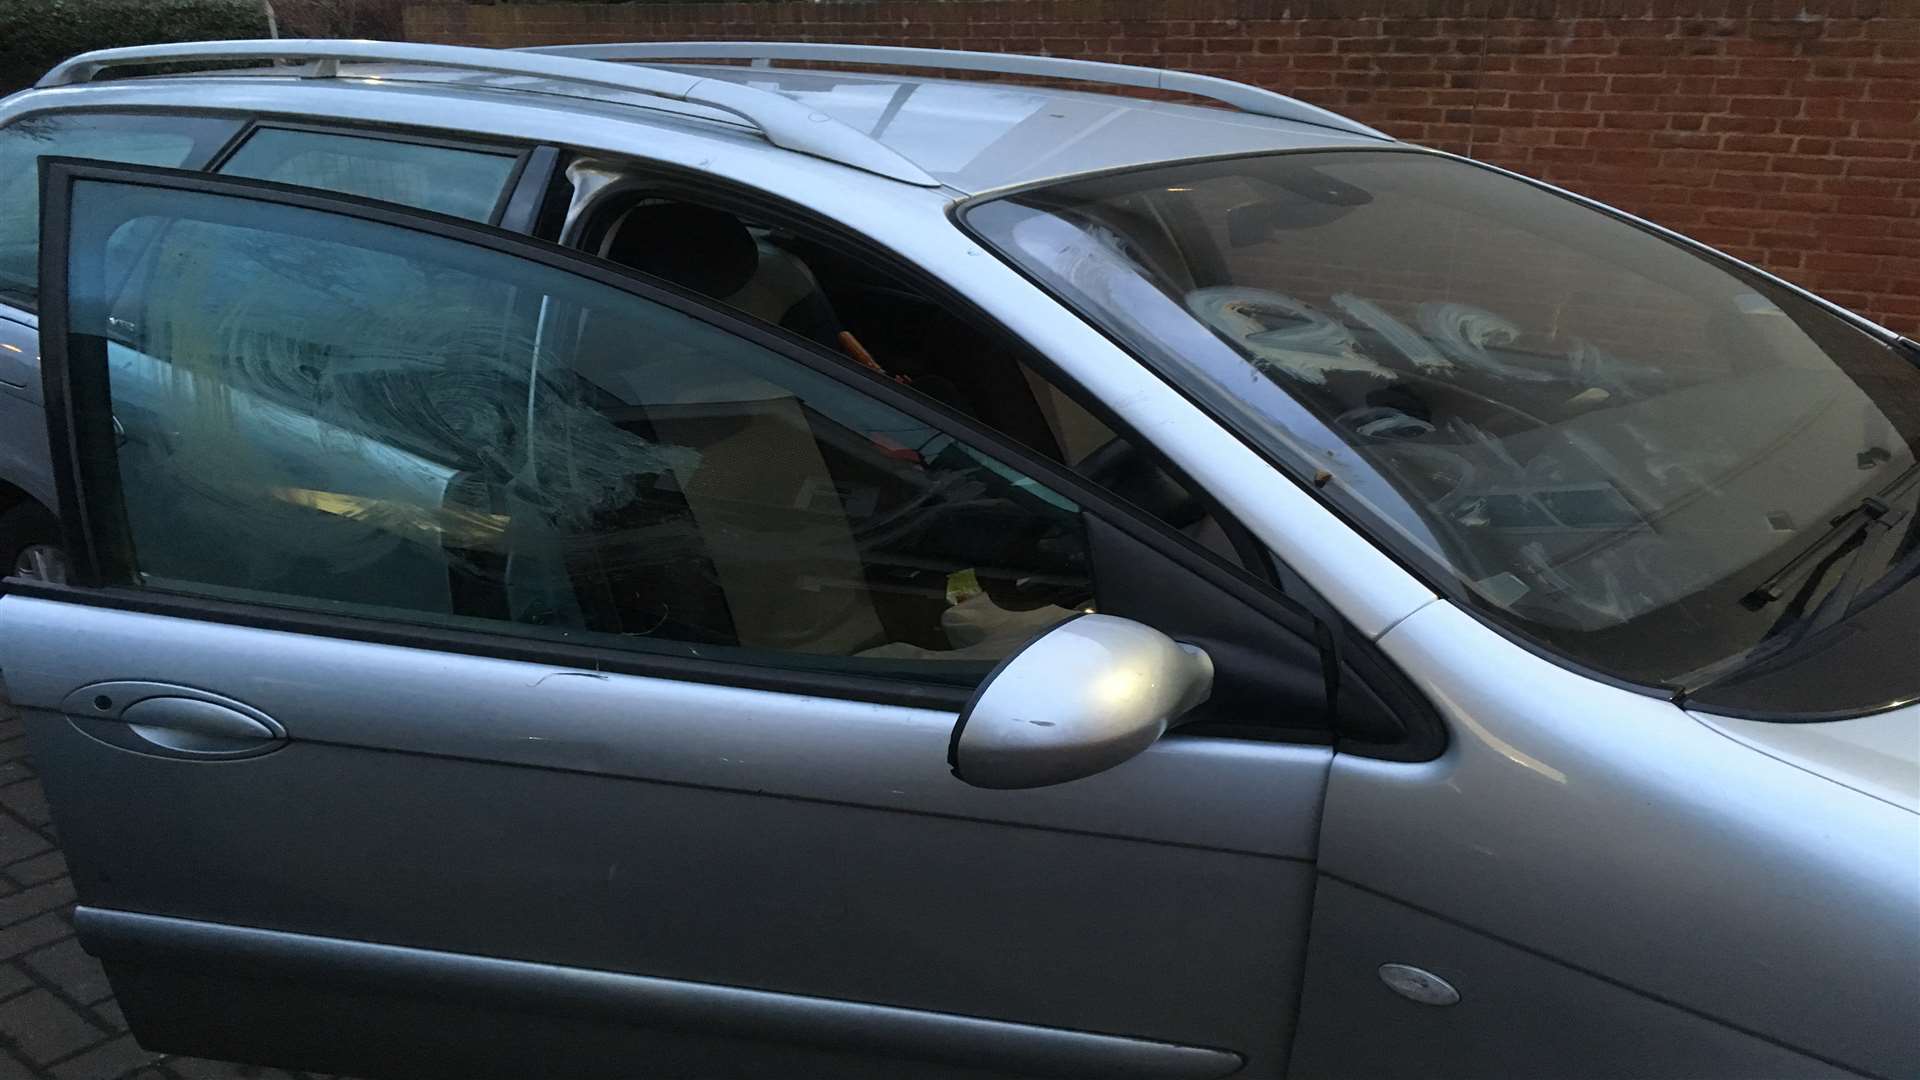 Elise Paterson returned from her dog walk to find her car covered in excrement